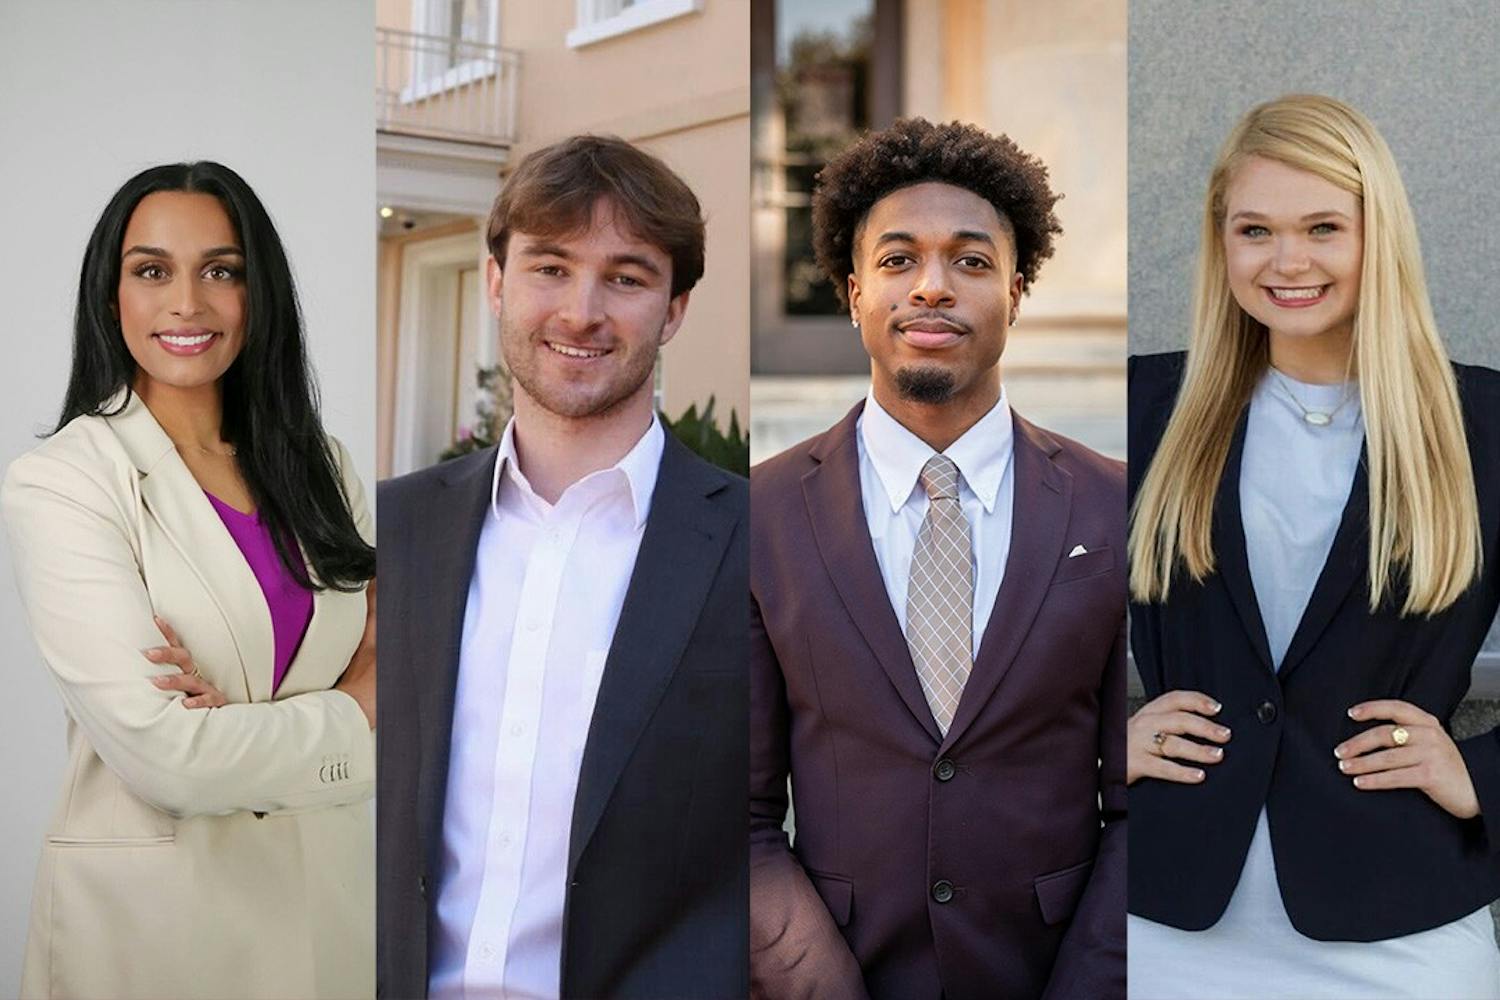 From left to right, Gurujjal Roopra, Nicholas Marzullo, Joshua Fair and Reedy Newton are the candidates running to be the next Student Body President. Students can vote for candidates from Feb. 22 at 9 a.m. to Feb. 23 at 5 p.m. Ballots will be available online.